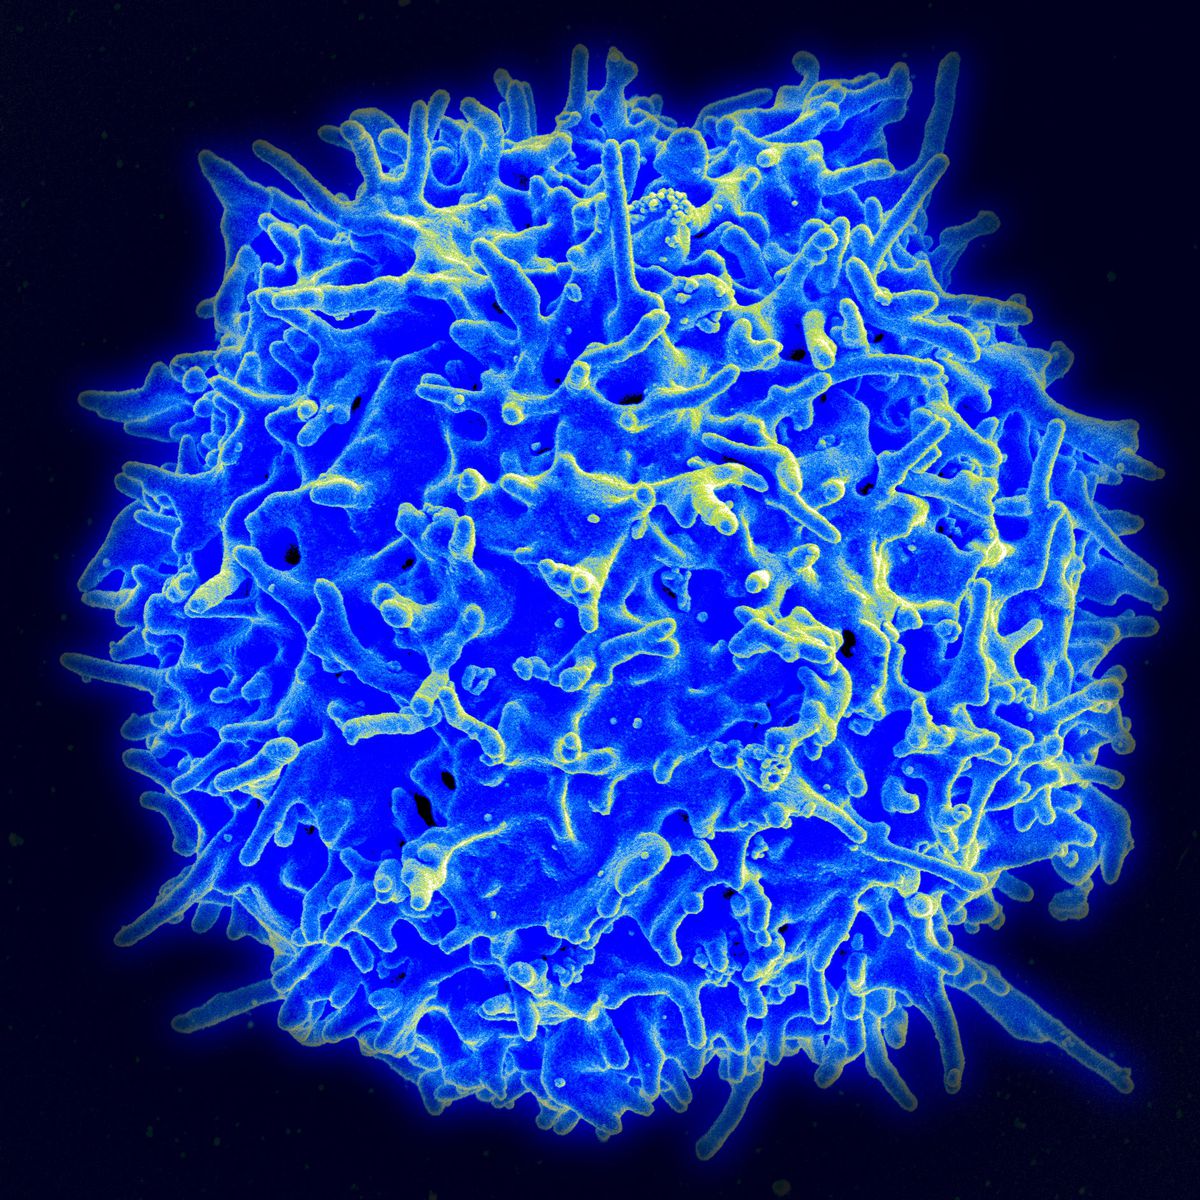 A human T-cell